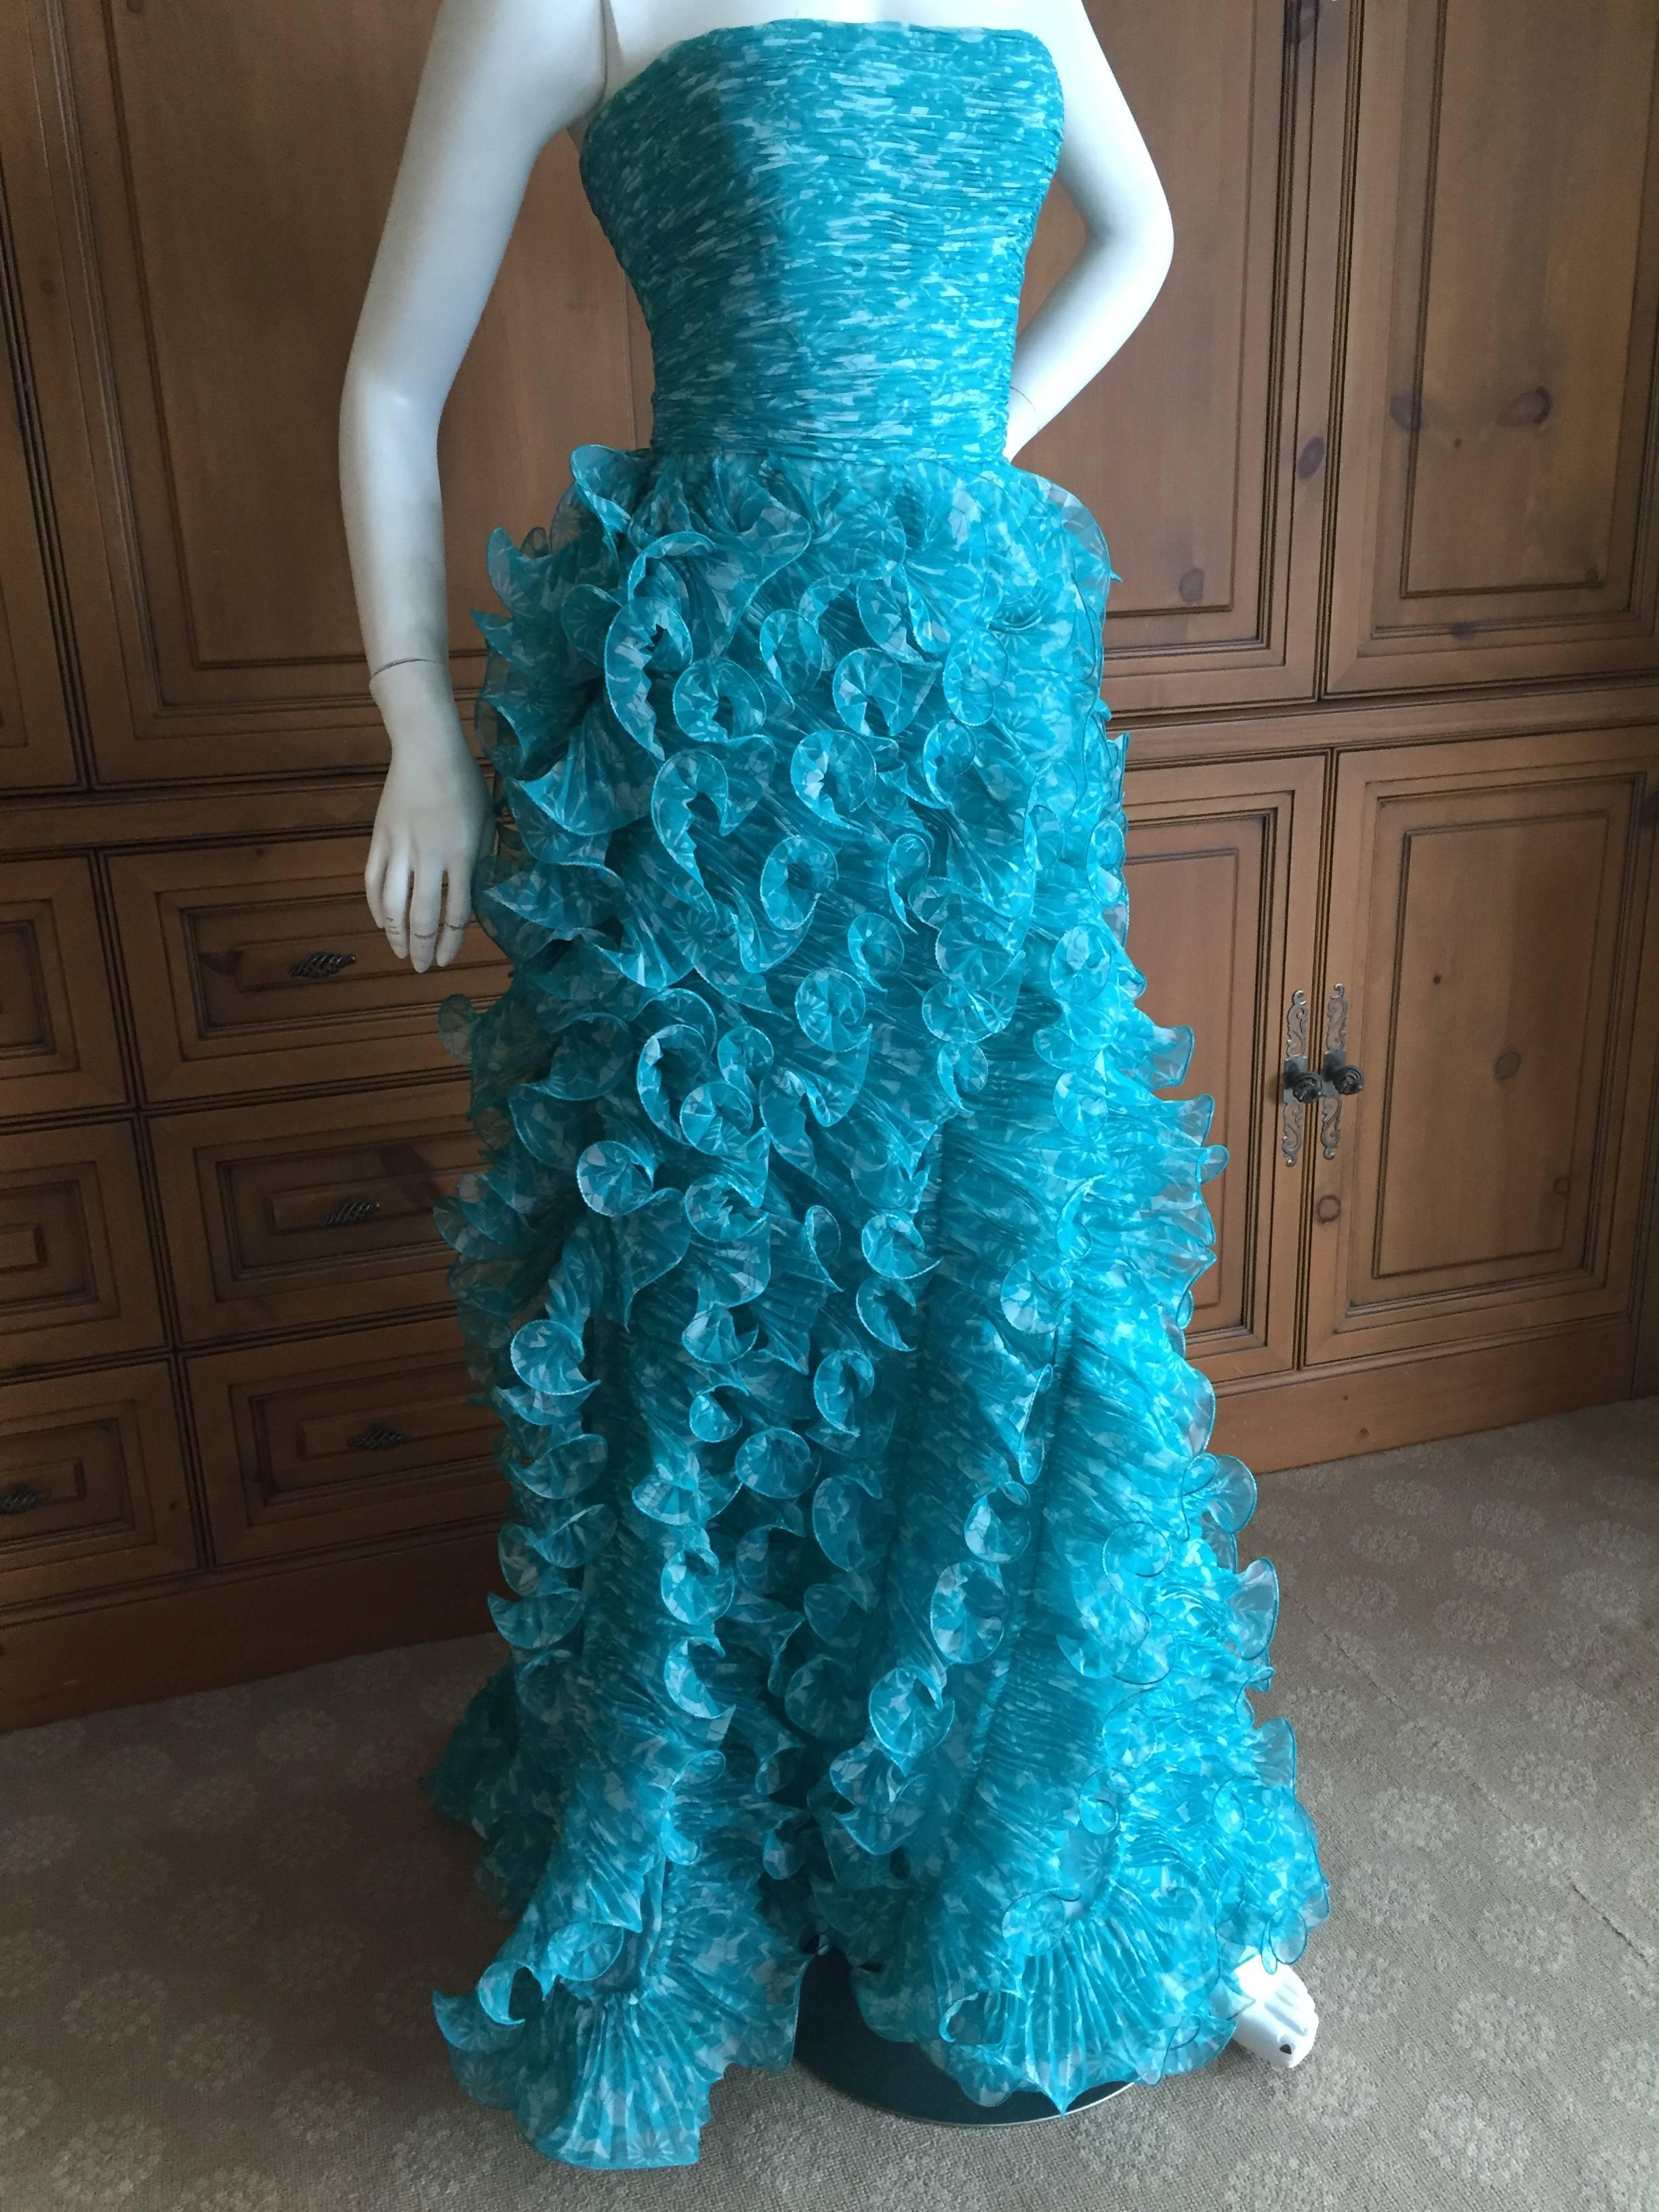 Oscar de la Renta Terrific Turquoise Vintage Ruffled Strapless Evening Gown

Featuring a full interior corset, the fabric looks like shimmering Caribbean waves, so pretty. 
Size 2

Bust 34